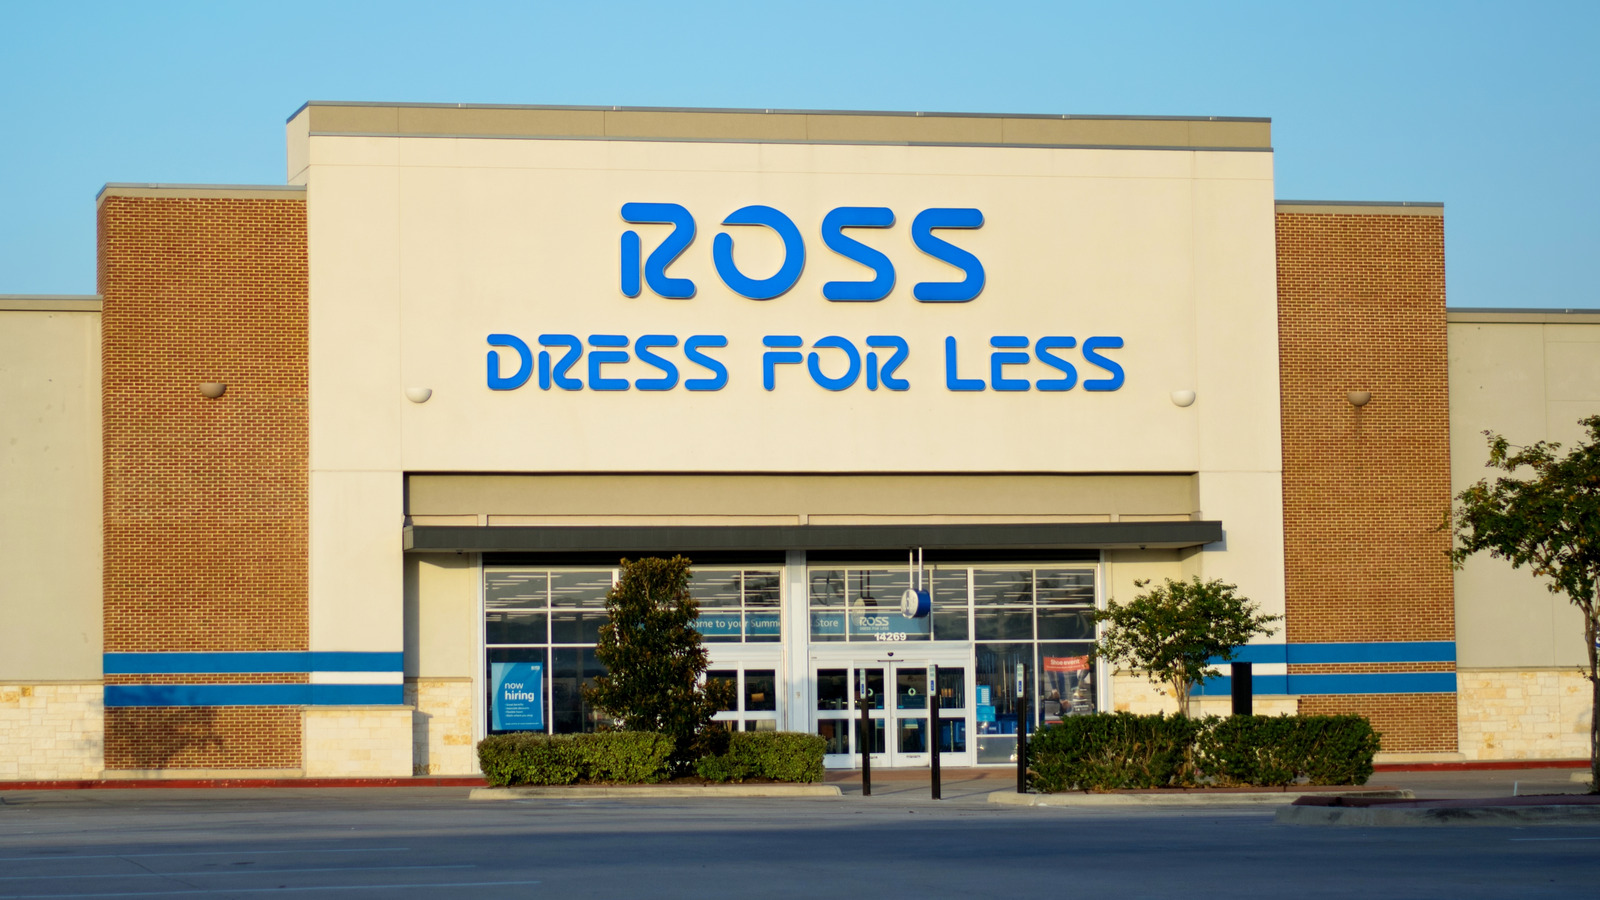 Here's Why You Think Twice About Buying Ross Items With This Tag